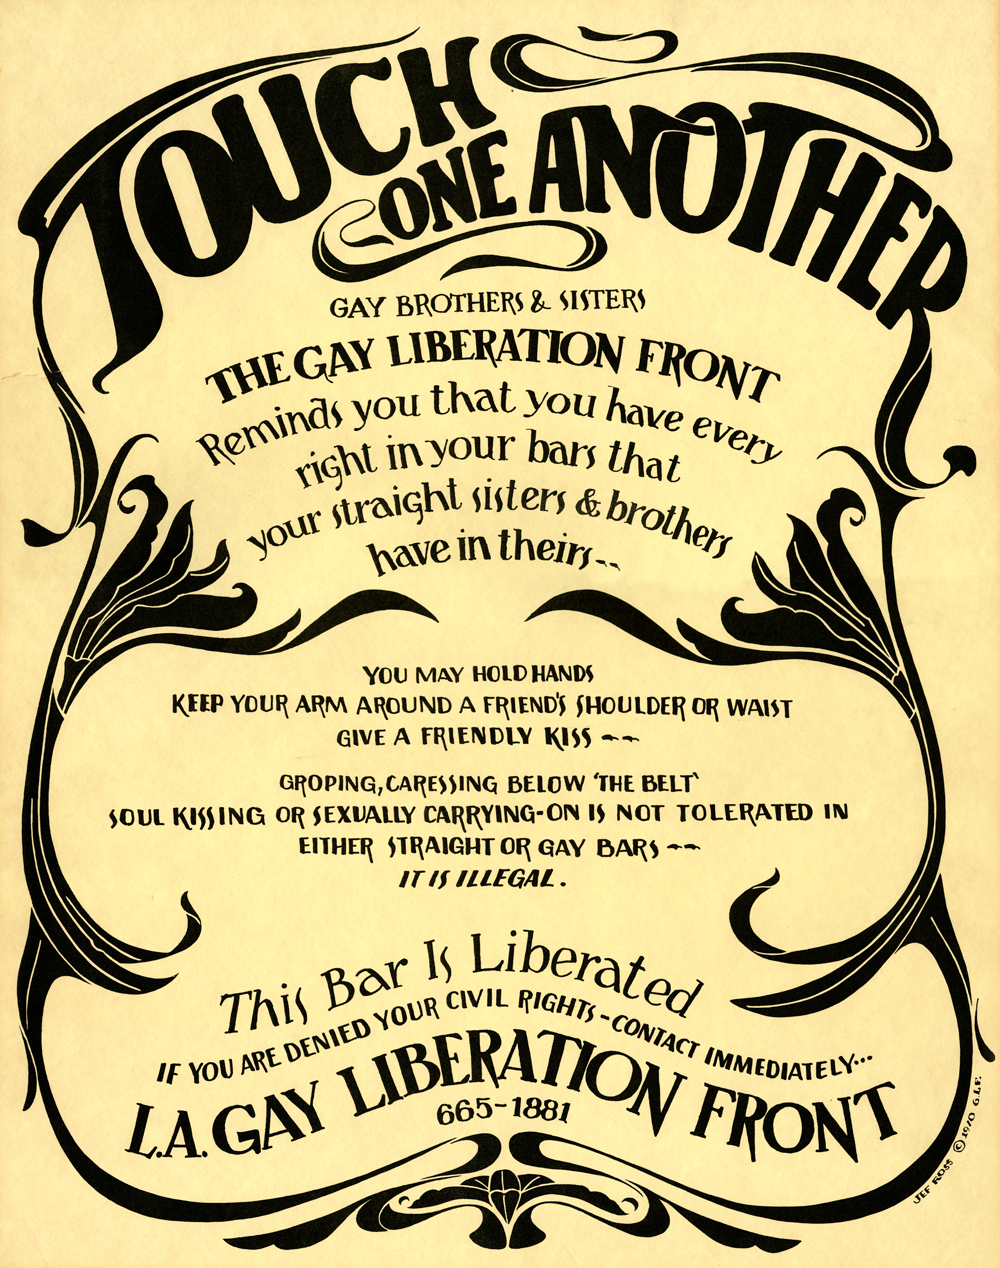 la-glf poster touch-one-another.jpg